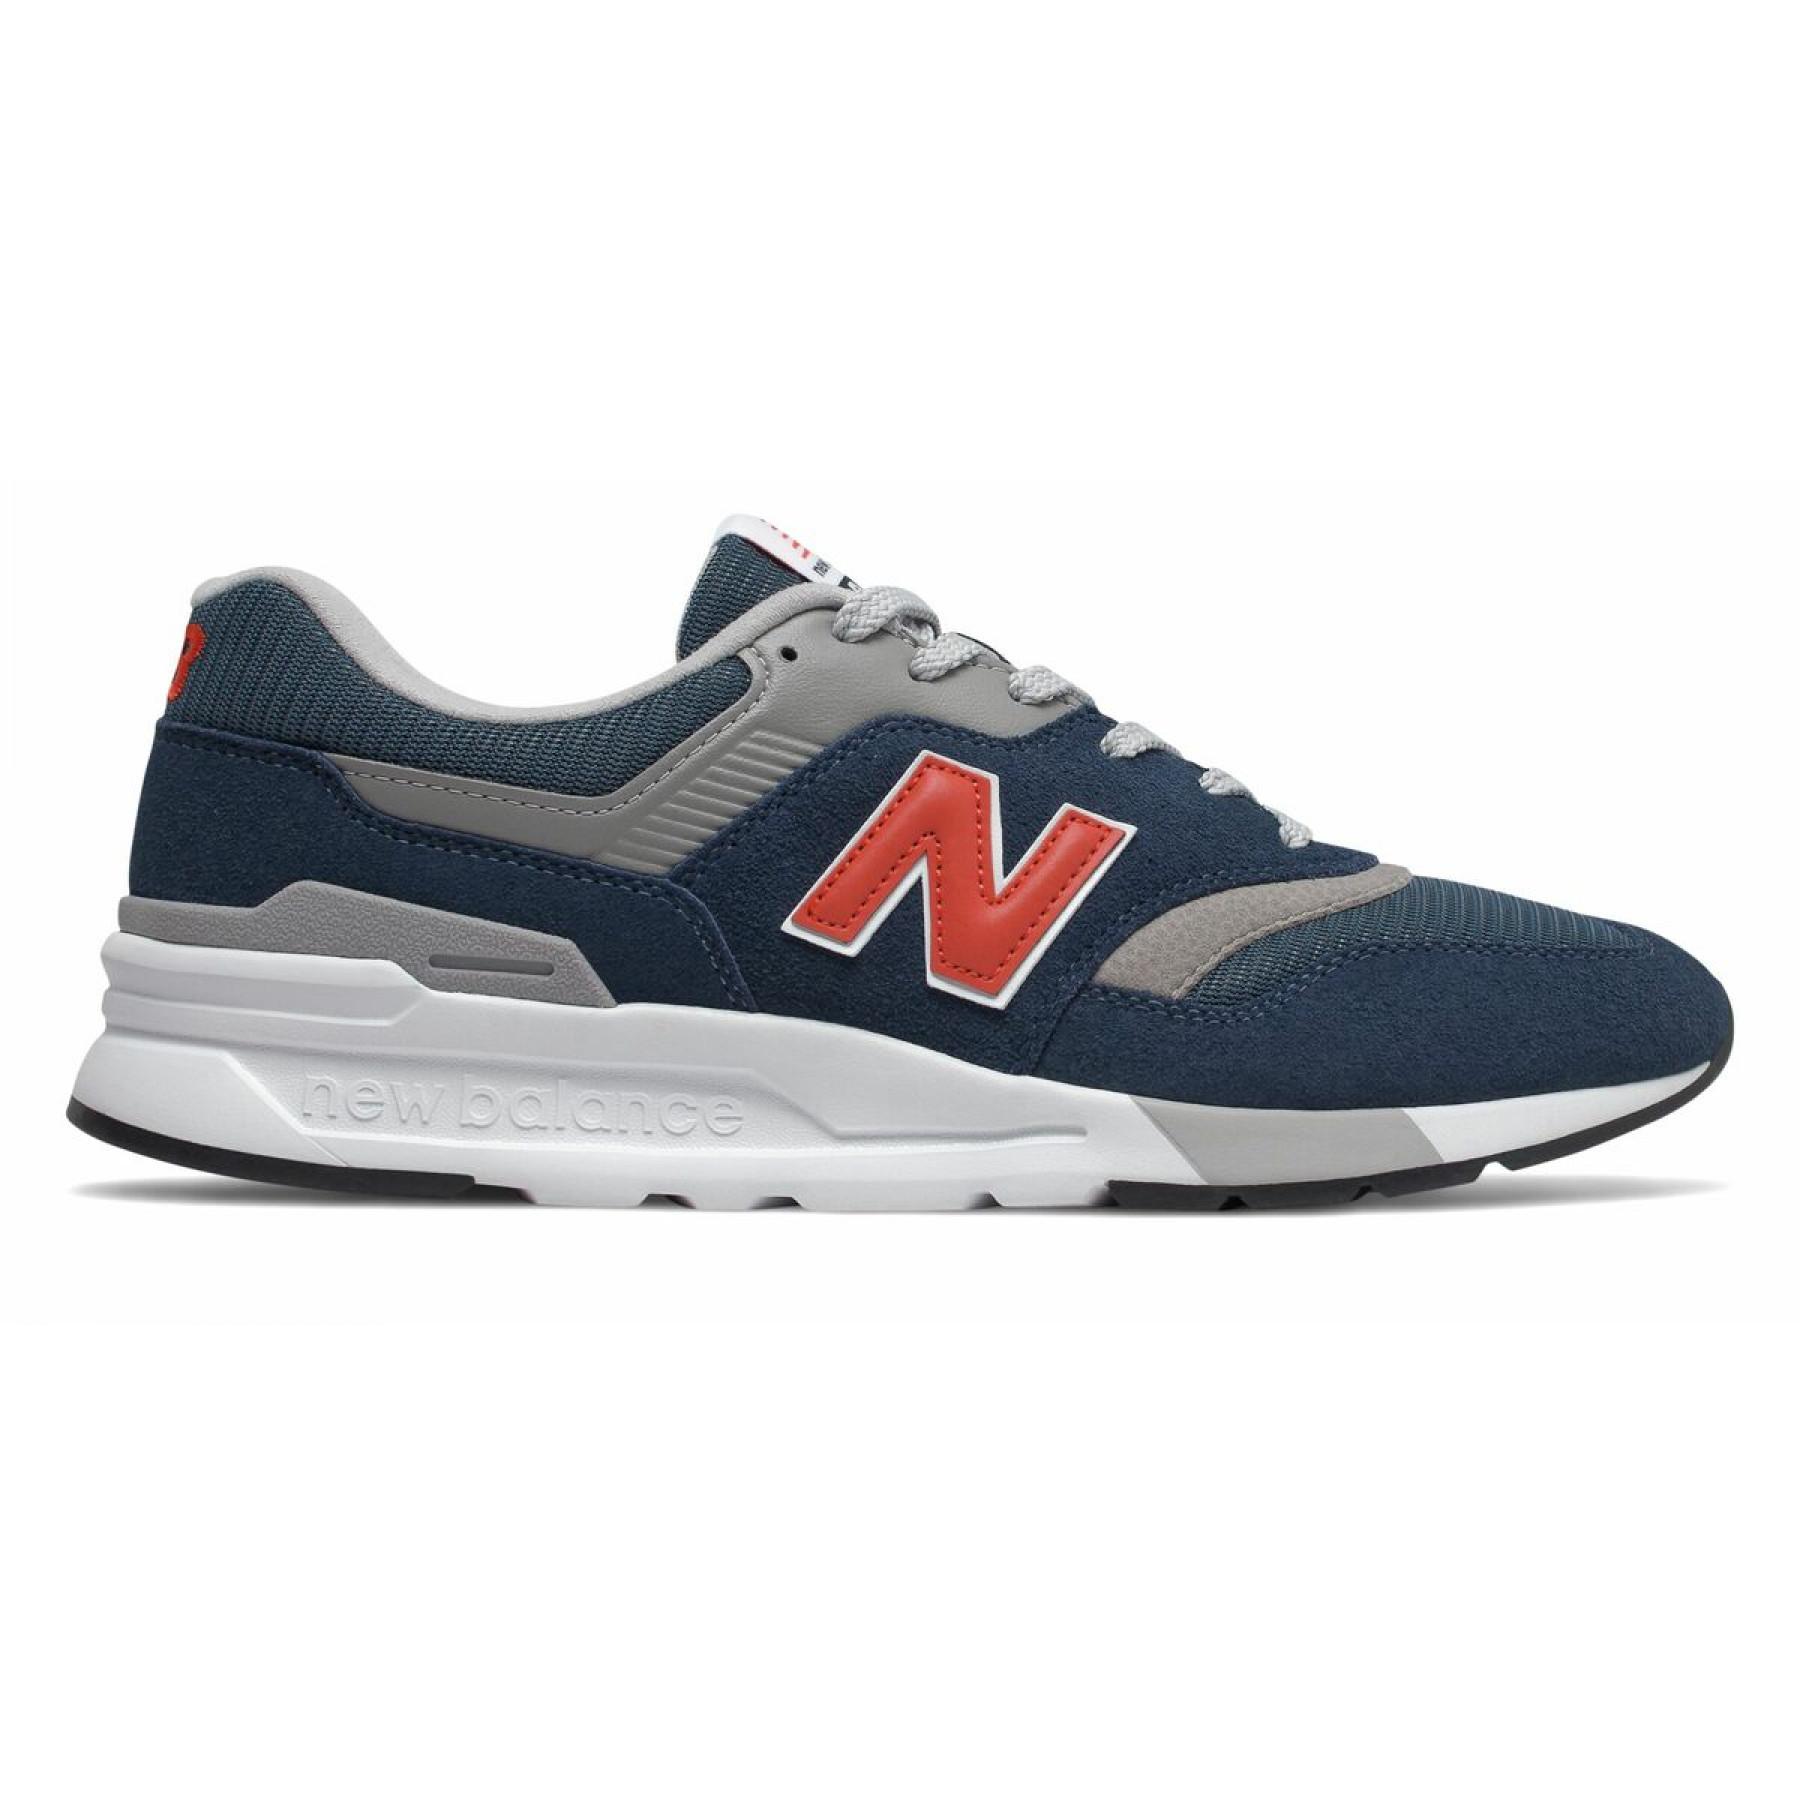 Sneakers New Balance 997h